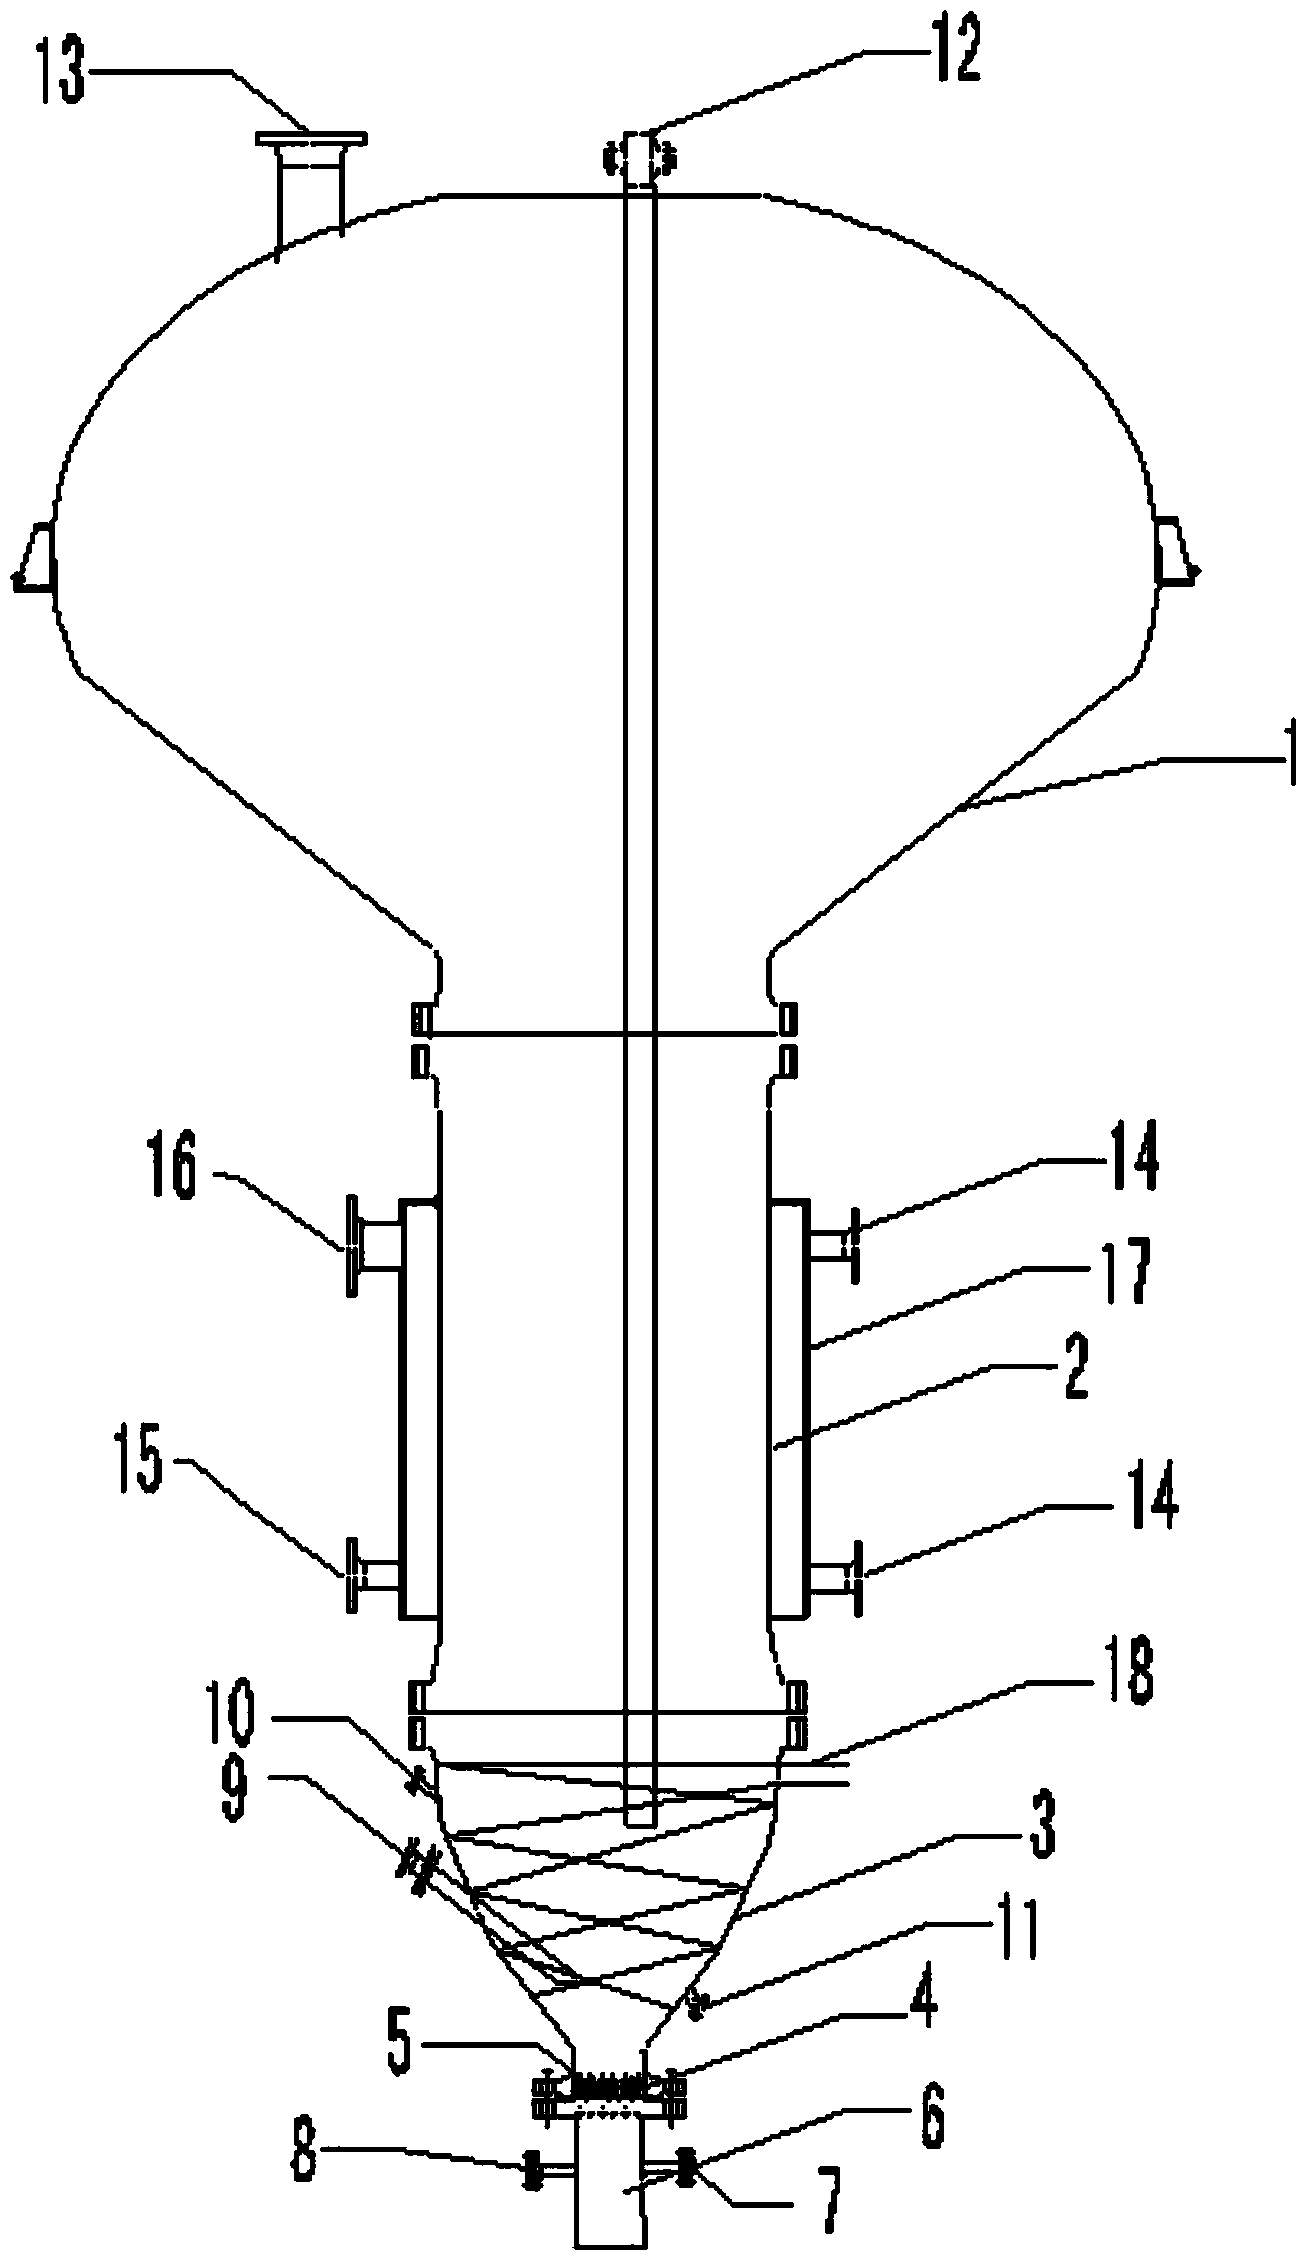 Fluidized bed reactor for producing trichlorosilane